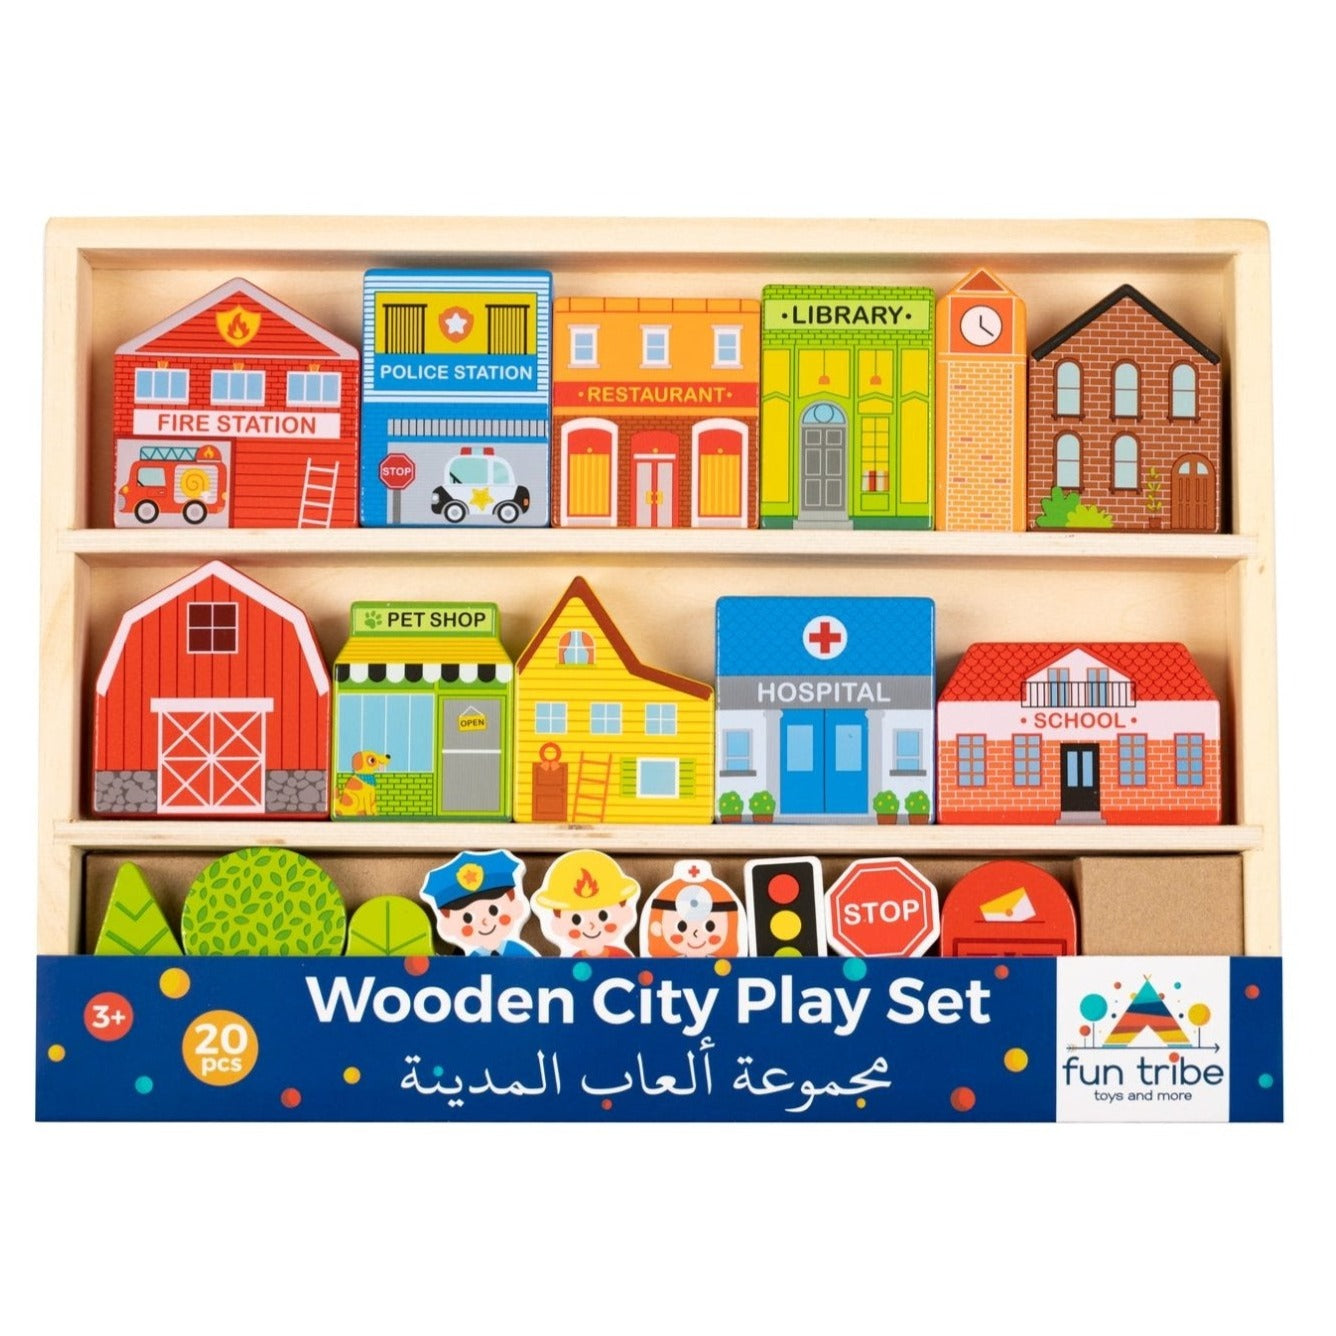 Fun Tribe Wooden City Play Set - Neo Essentials Store